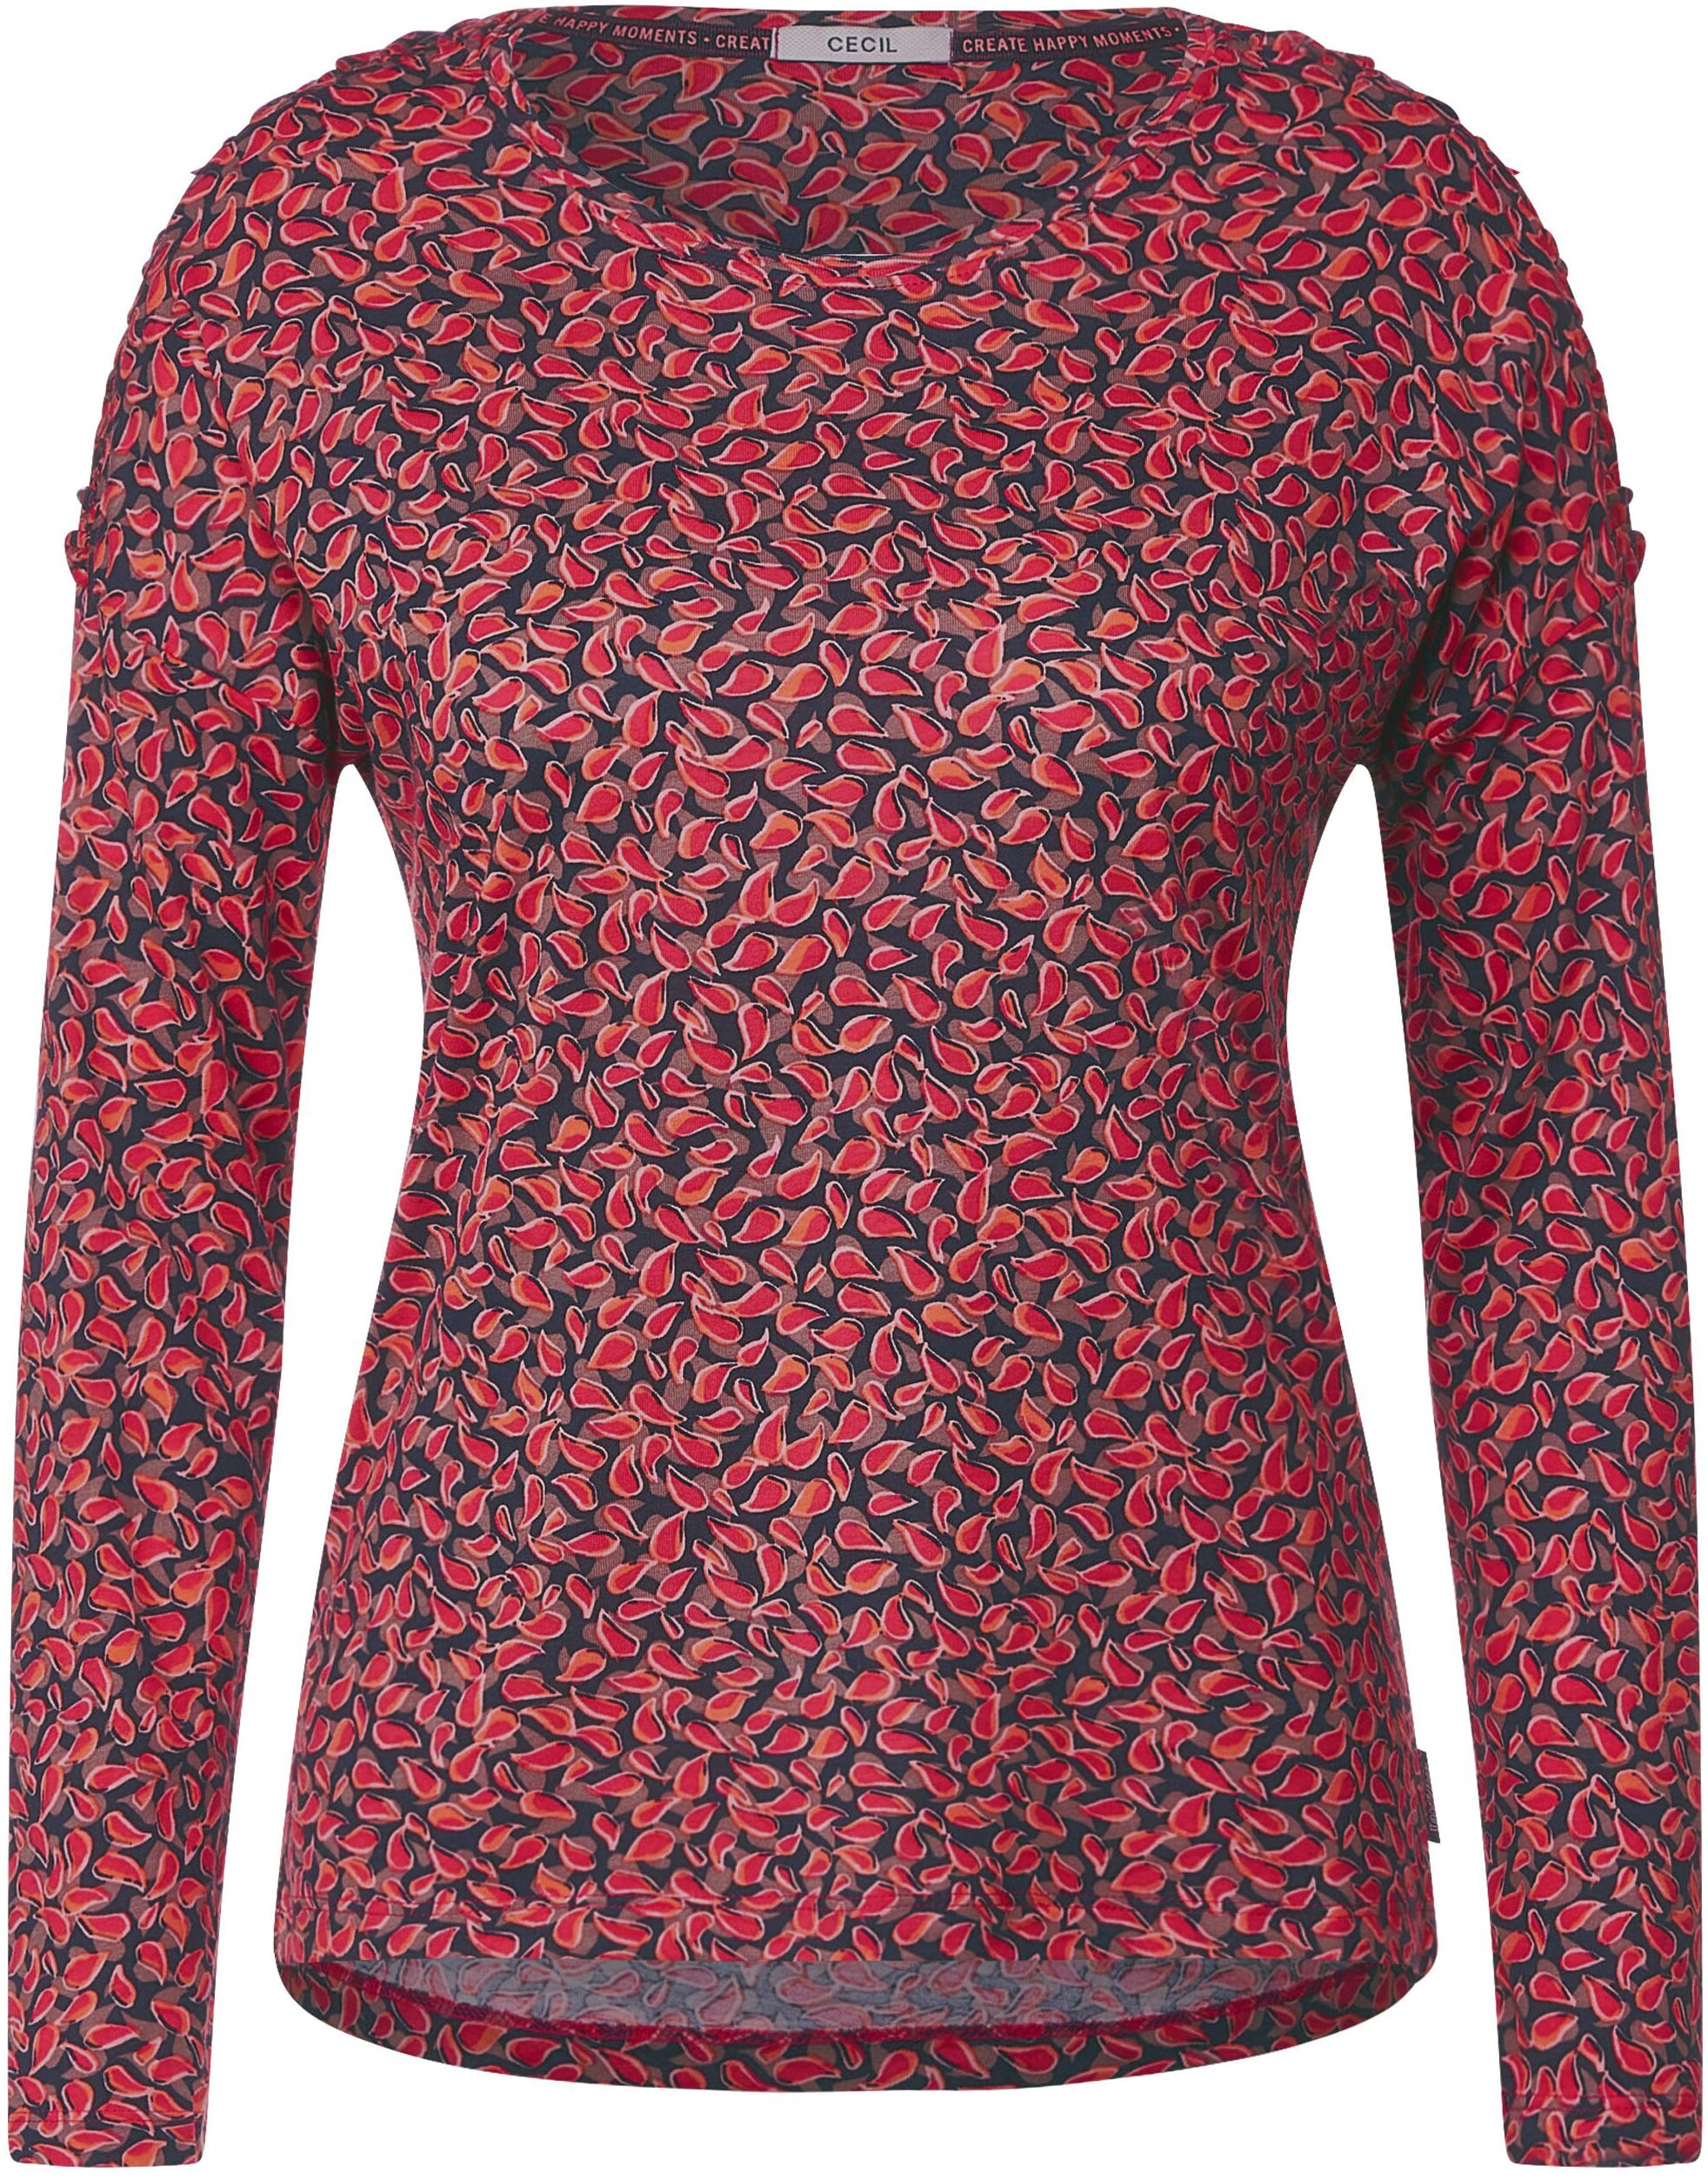 Paisley-Muster mit bei OTTO Cecil Langarmshirt,